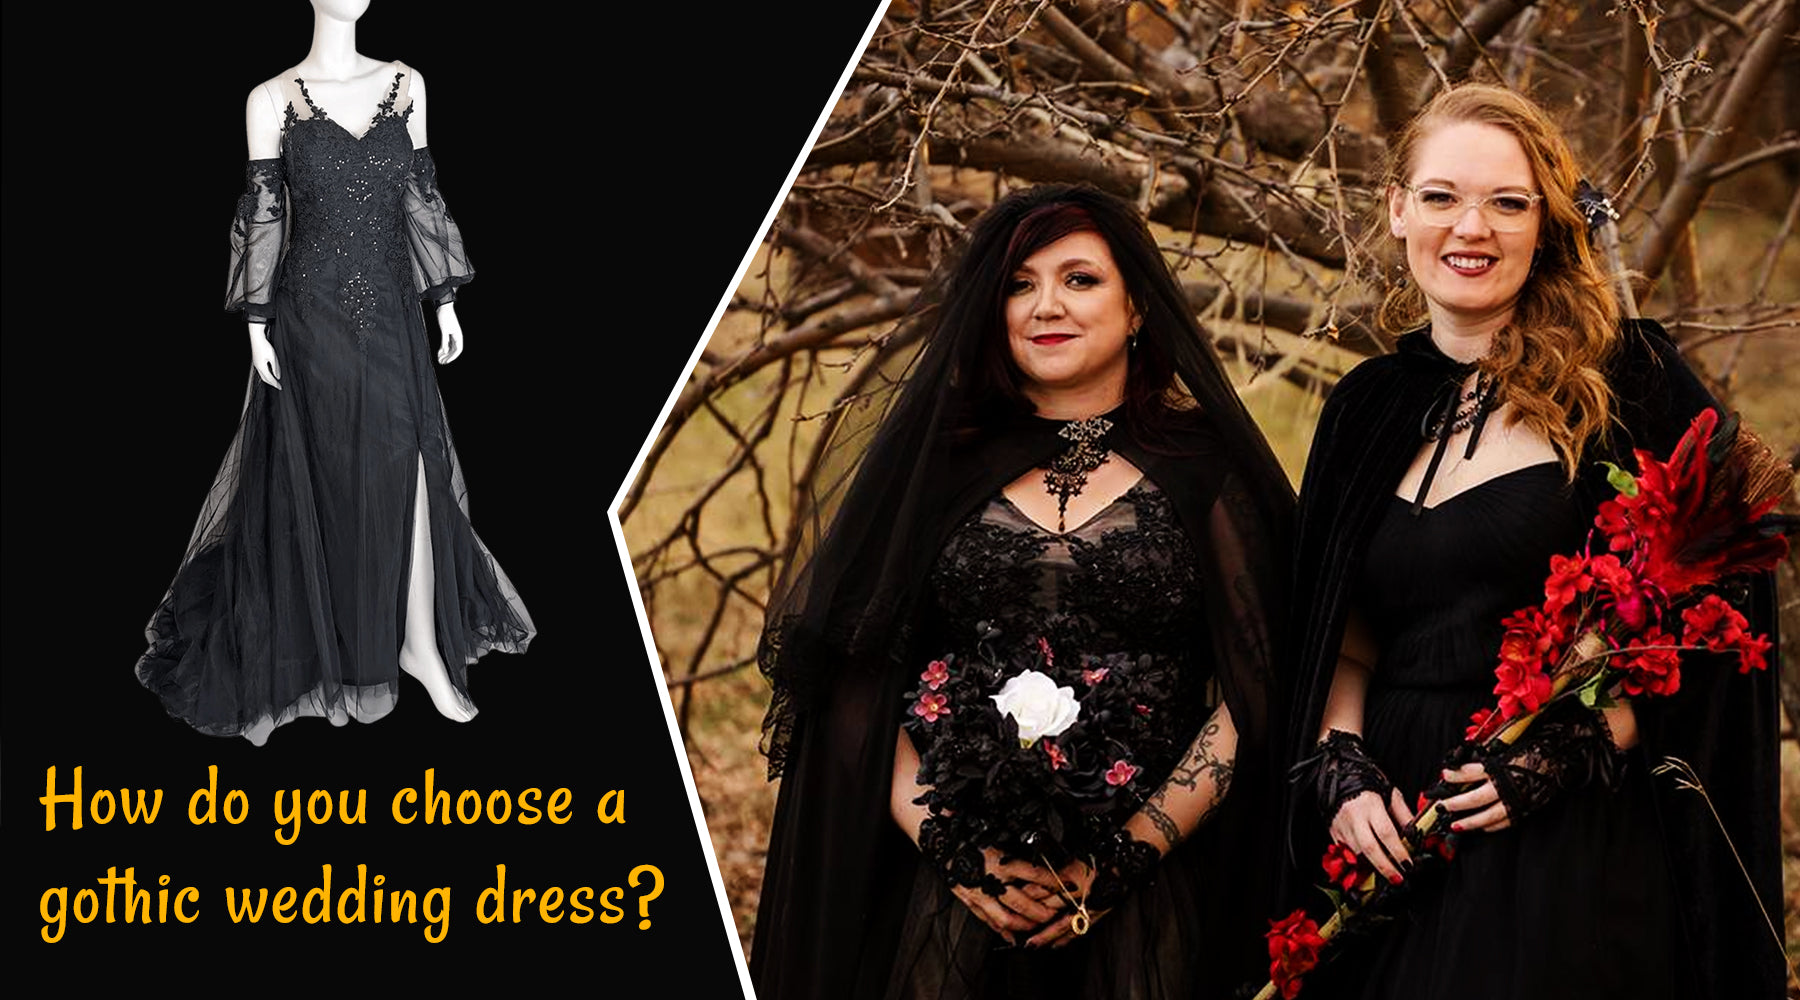 What is the most popular type of gothic wedding dress?